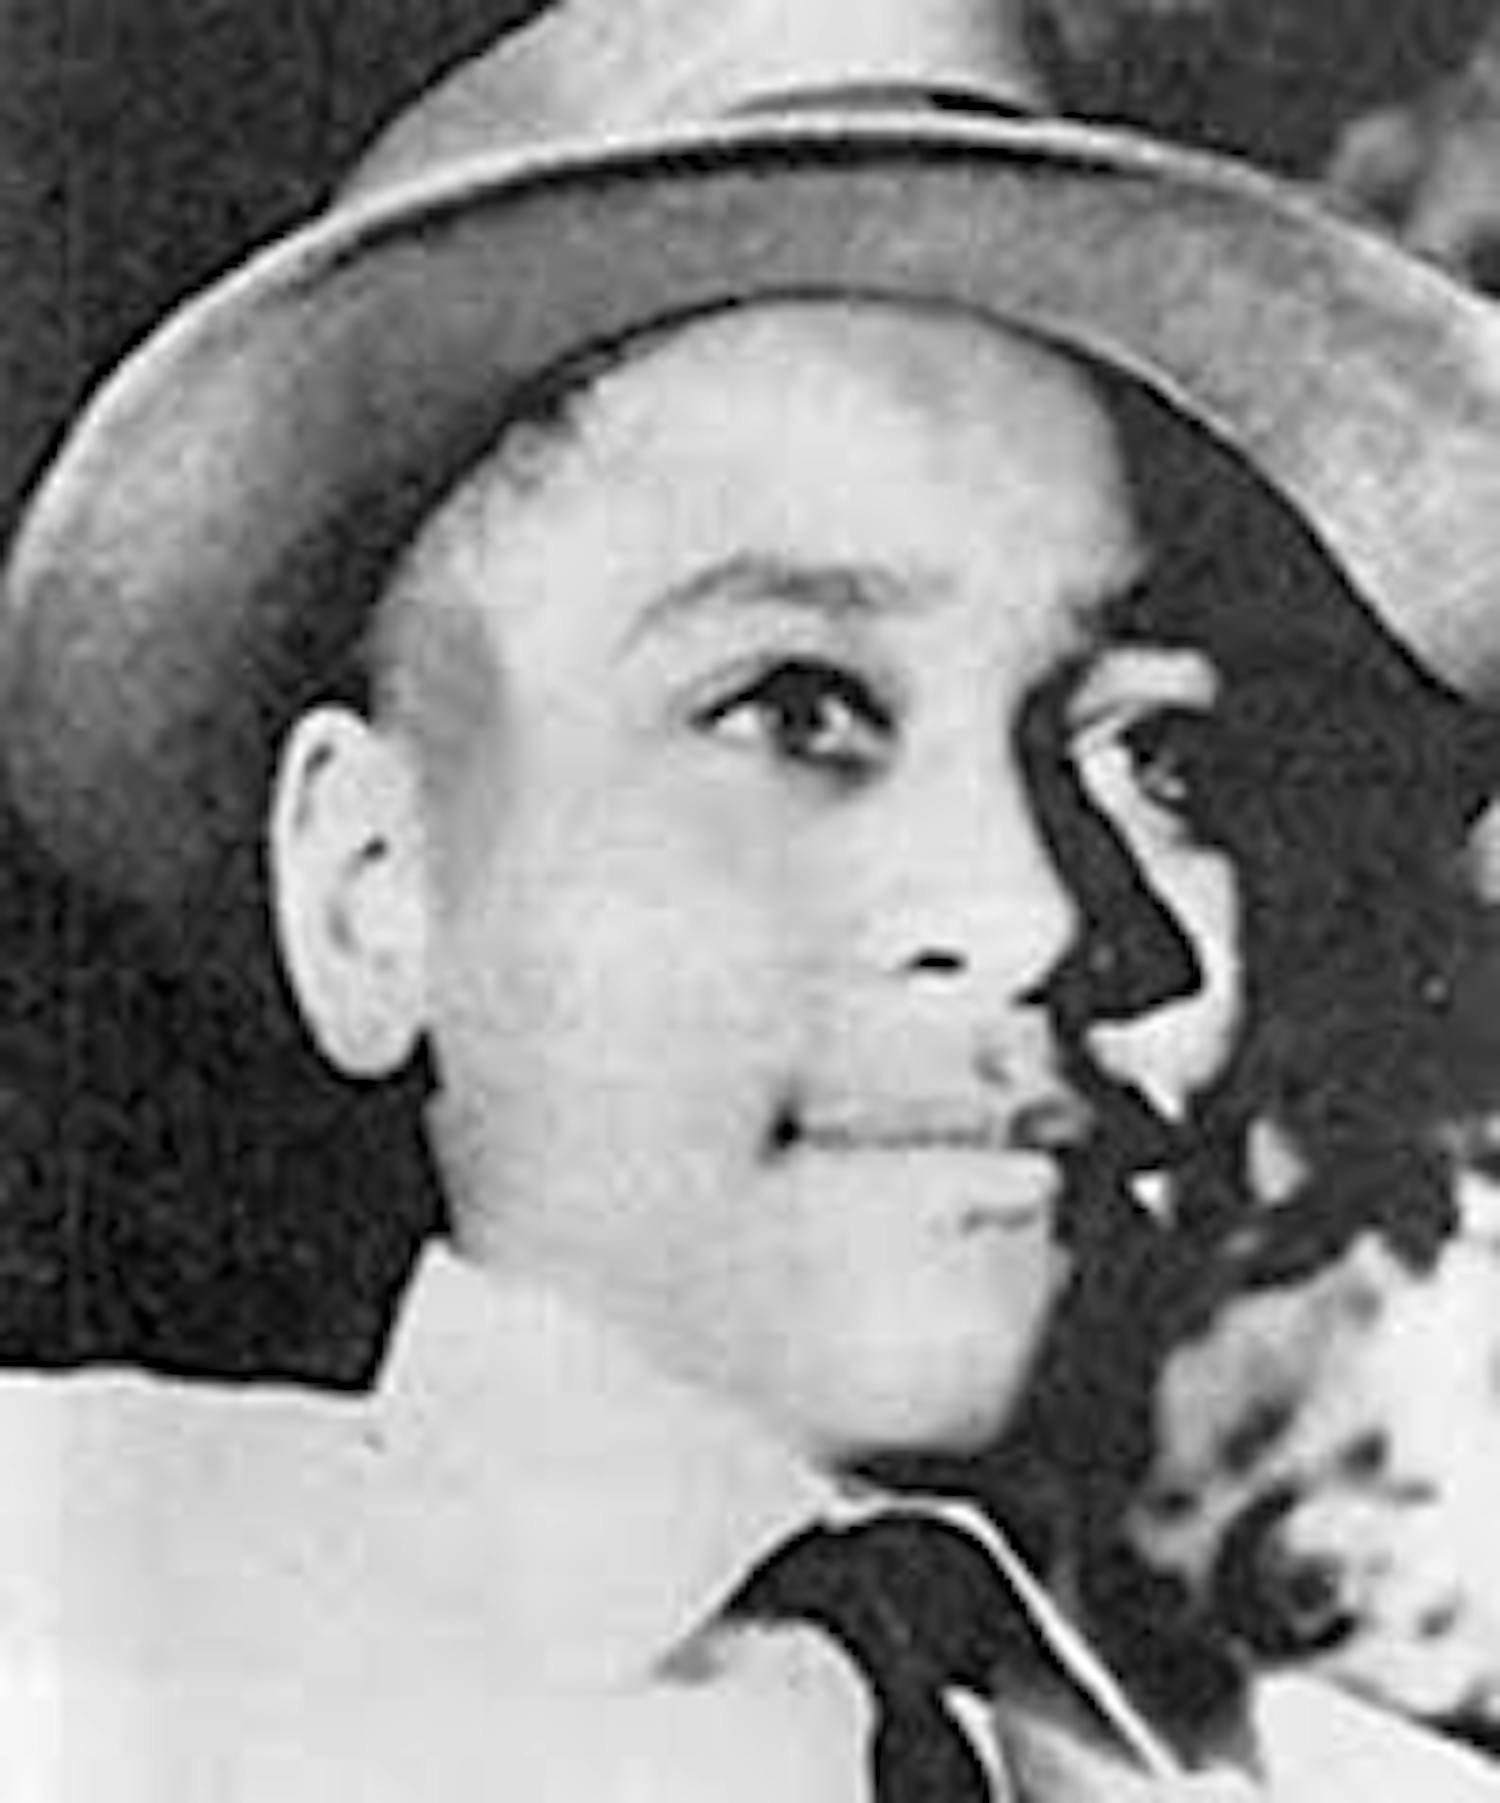 Professor Timothy Tyson's new book "The Blood of Emmett Till" uncovers new information surrounding Till's murder and contextualizes his death for the modern chapter&nbsp;of civil rights struggles.&nbsp;